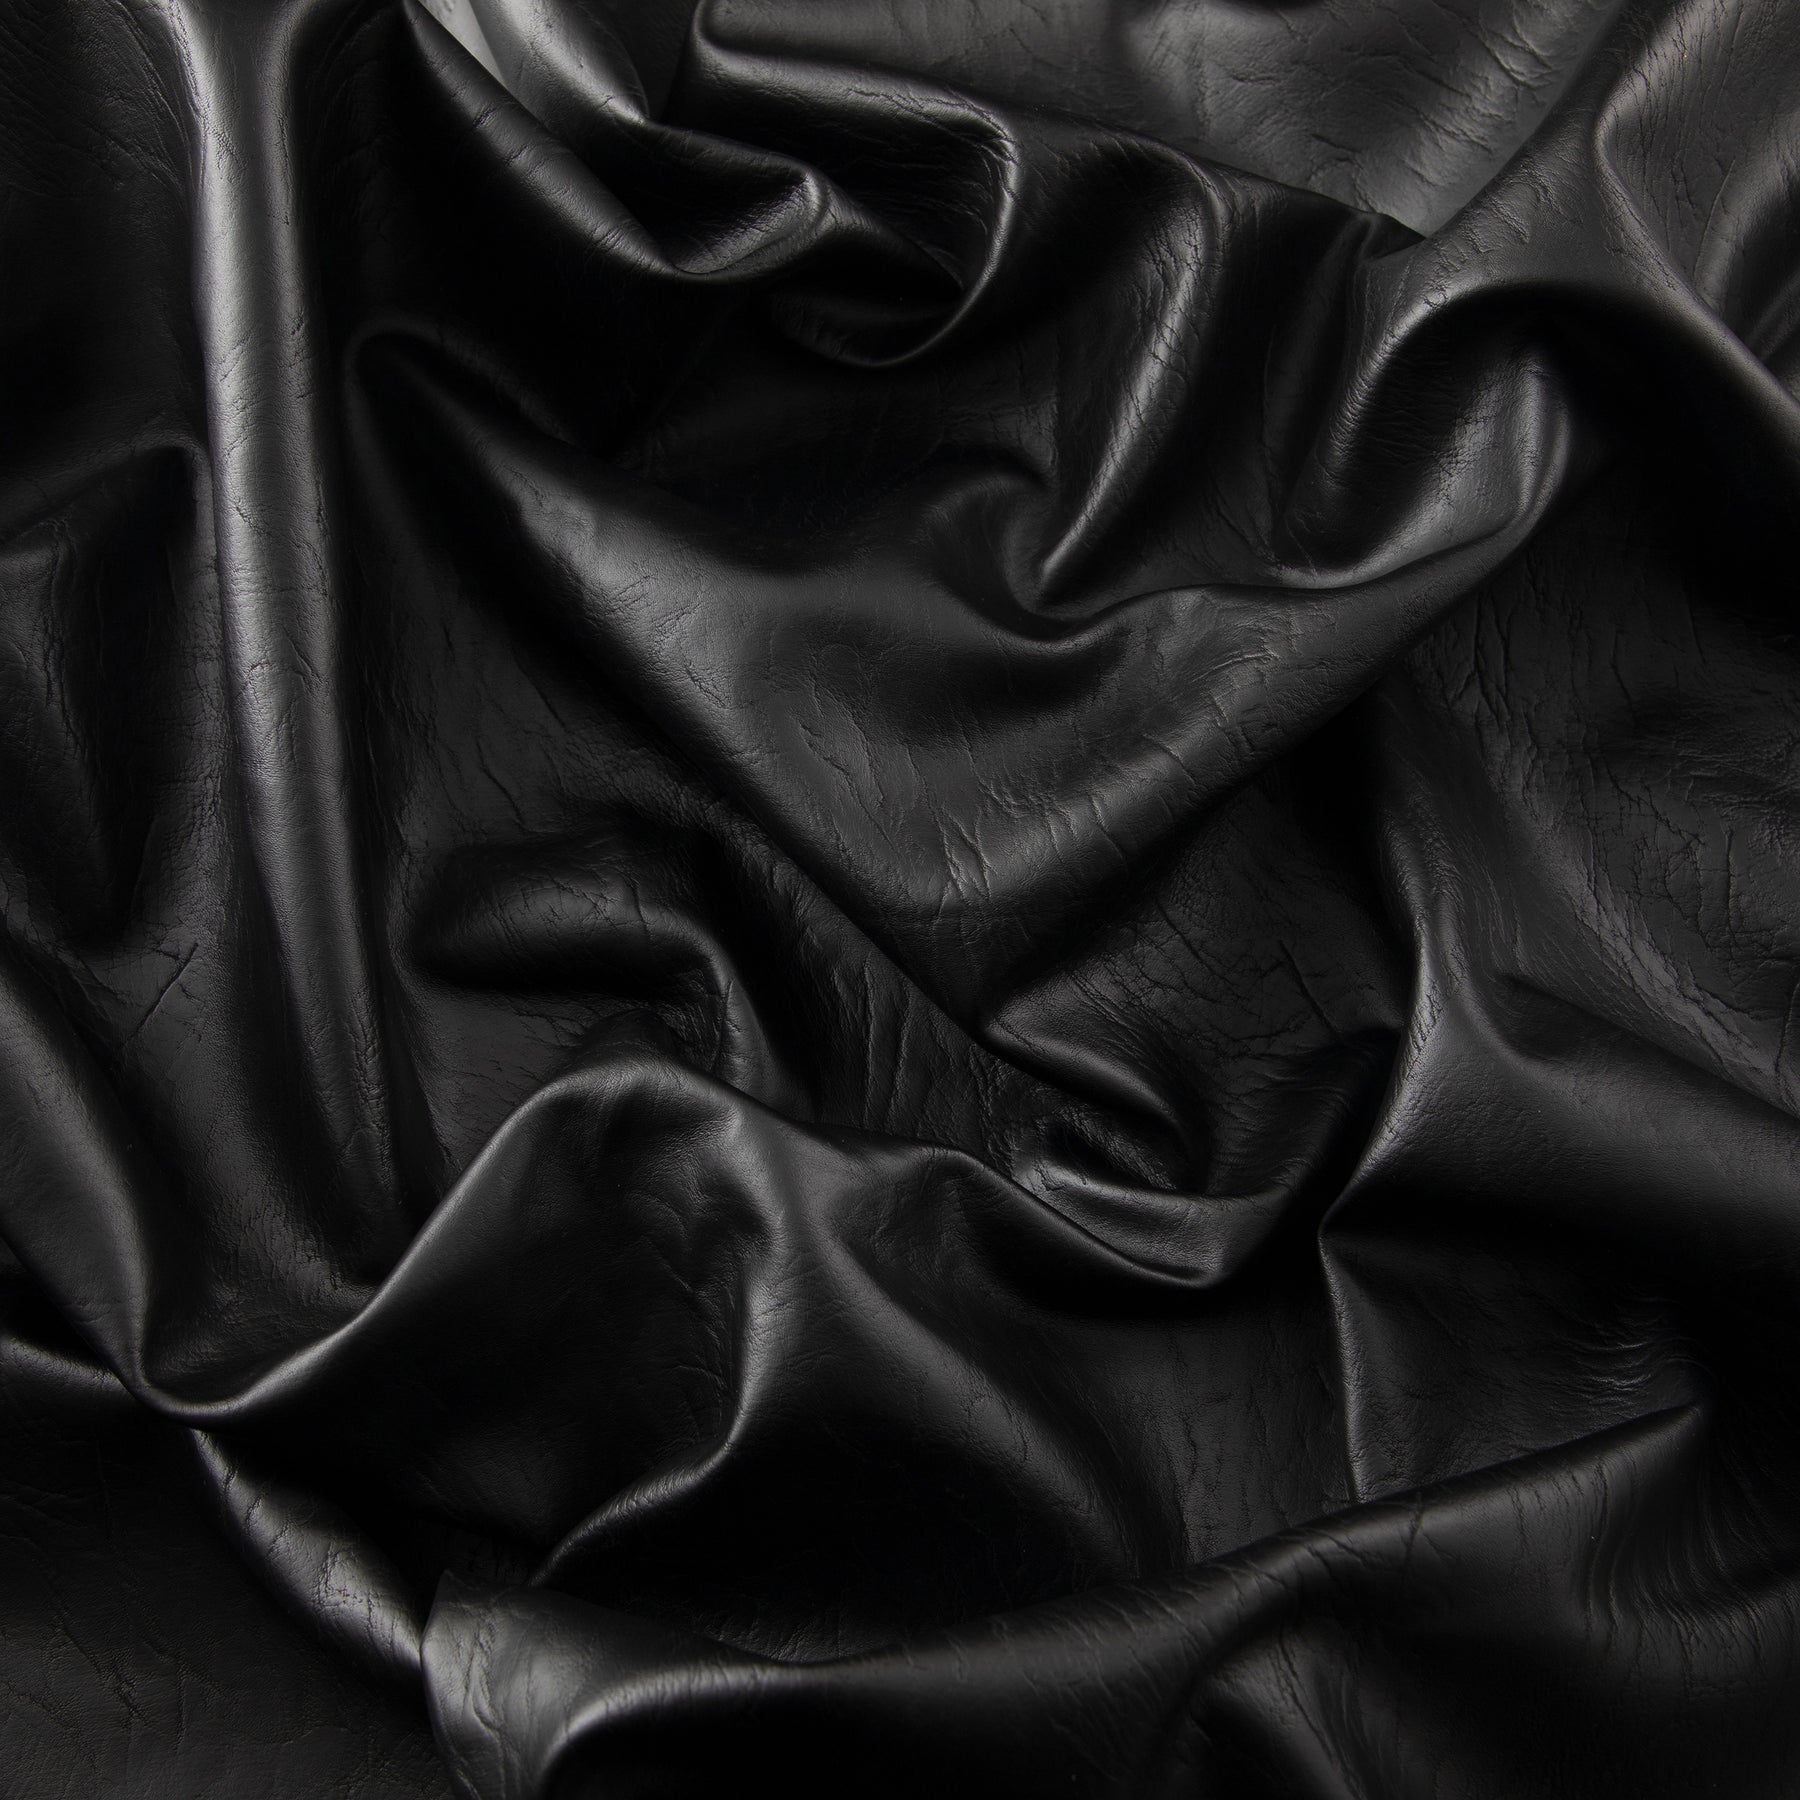 Black Textured Pleather/Faux Leather Black Textured Pleather/Faux